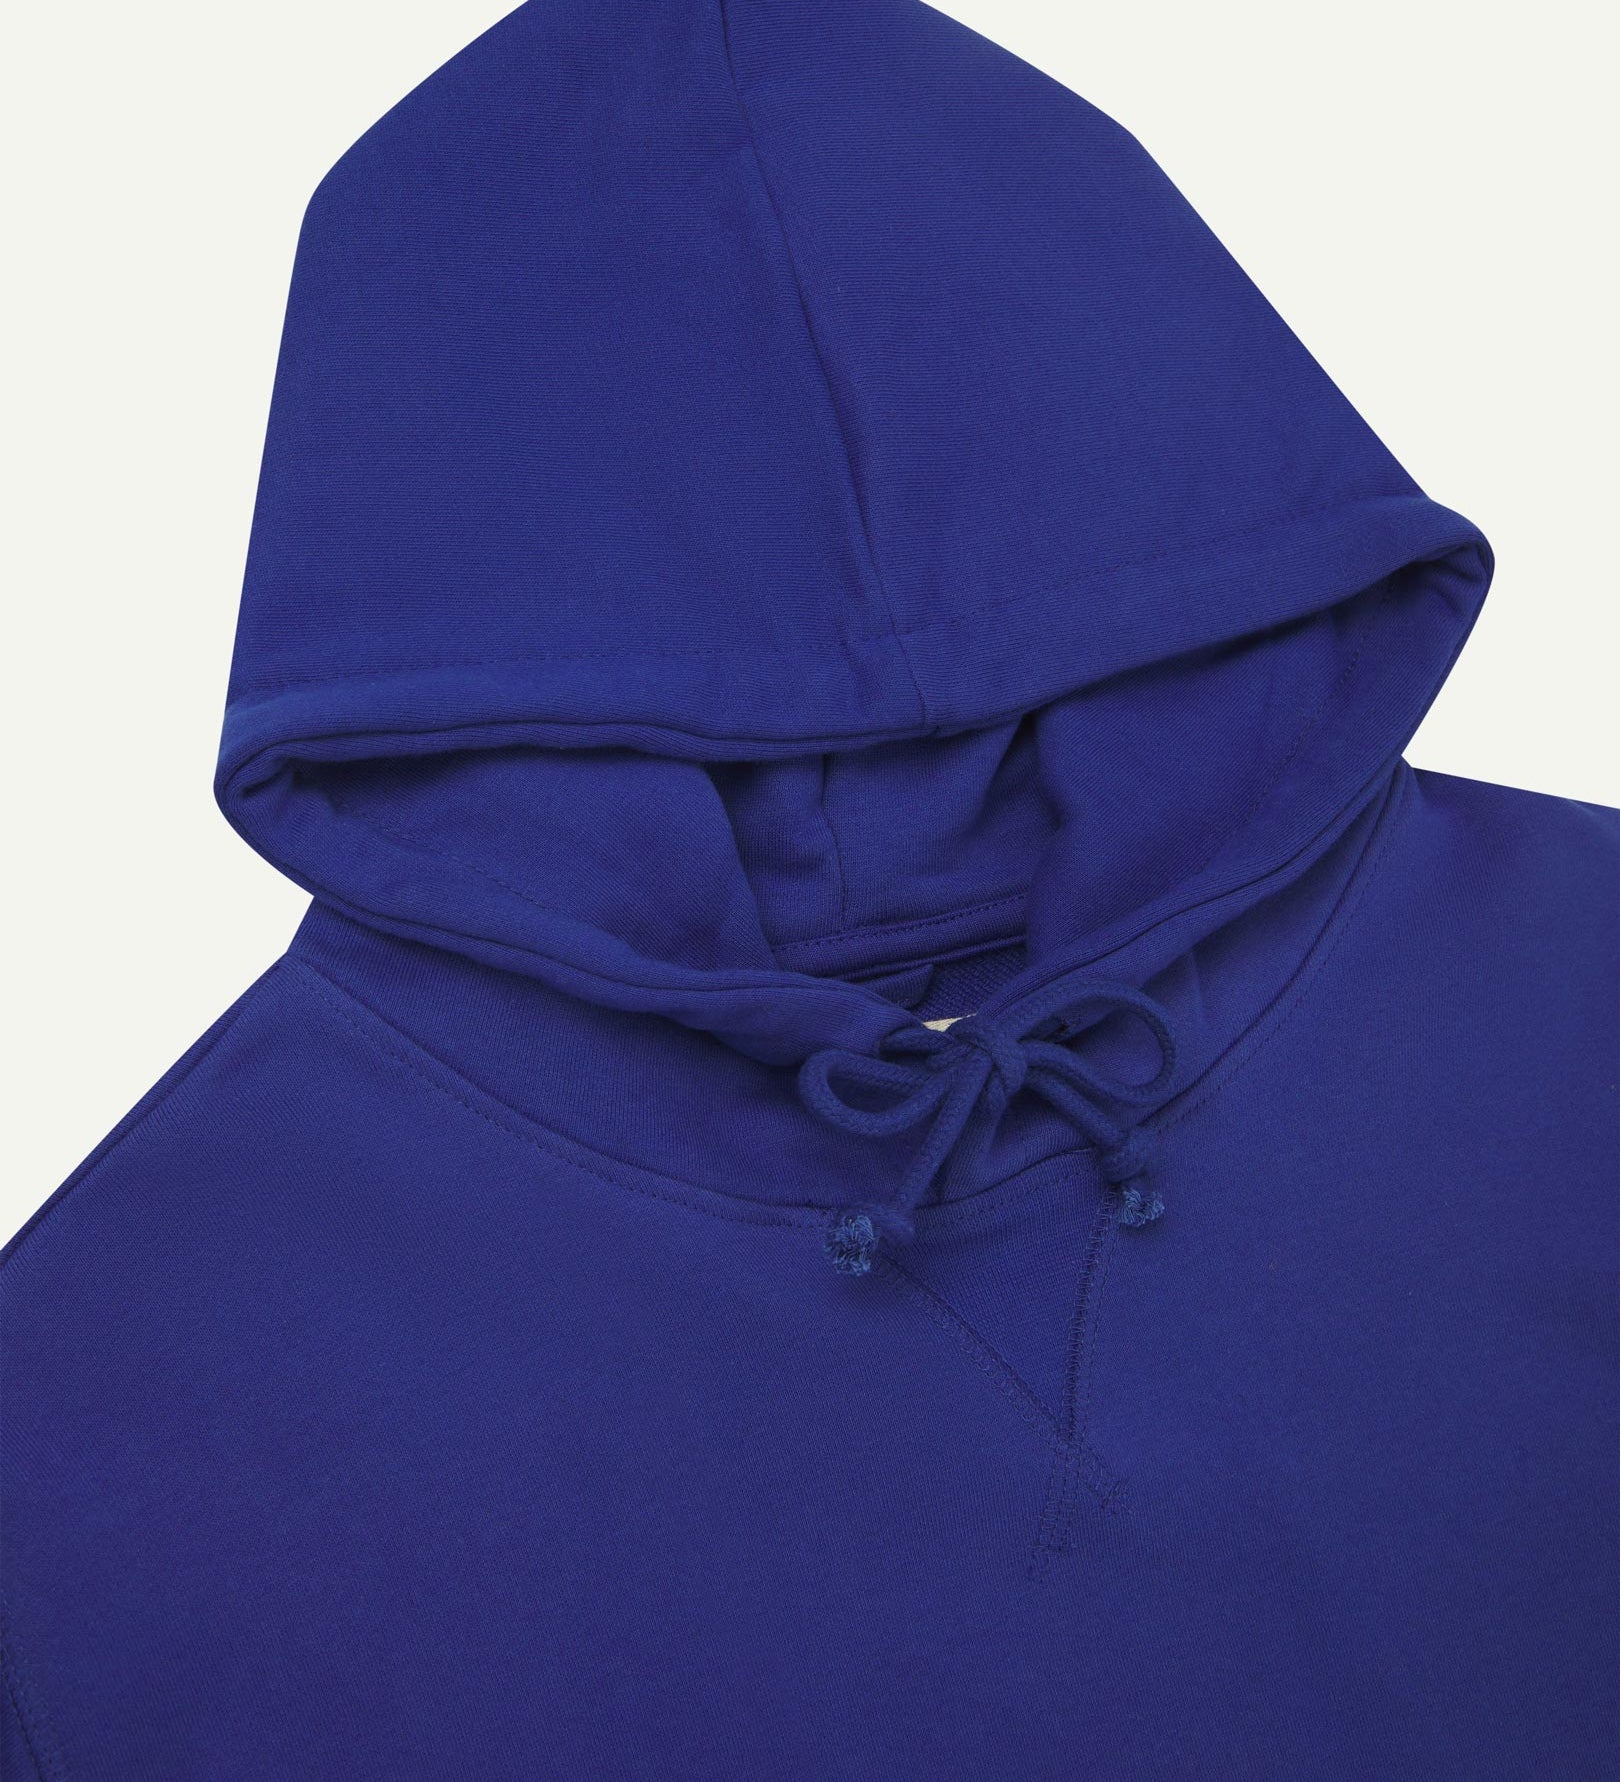 Front close-up view of Uskees 7004 'ultra blue' hoodie showing hood tie detail at neck and decorative V pattern.